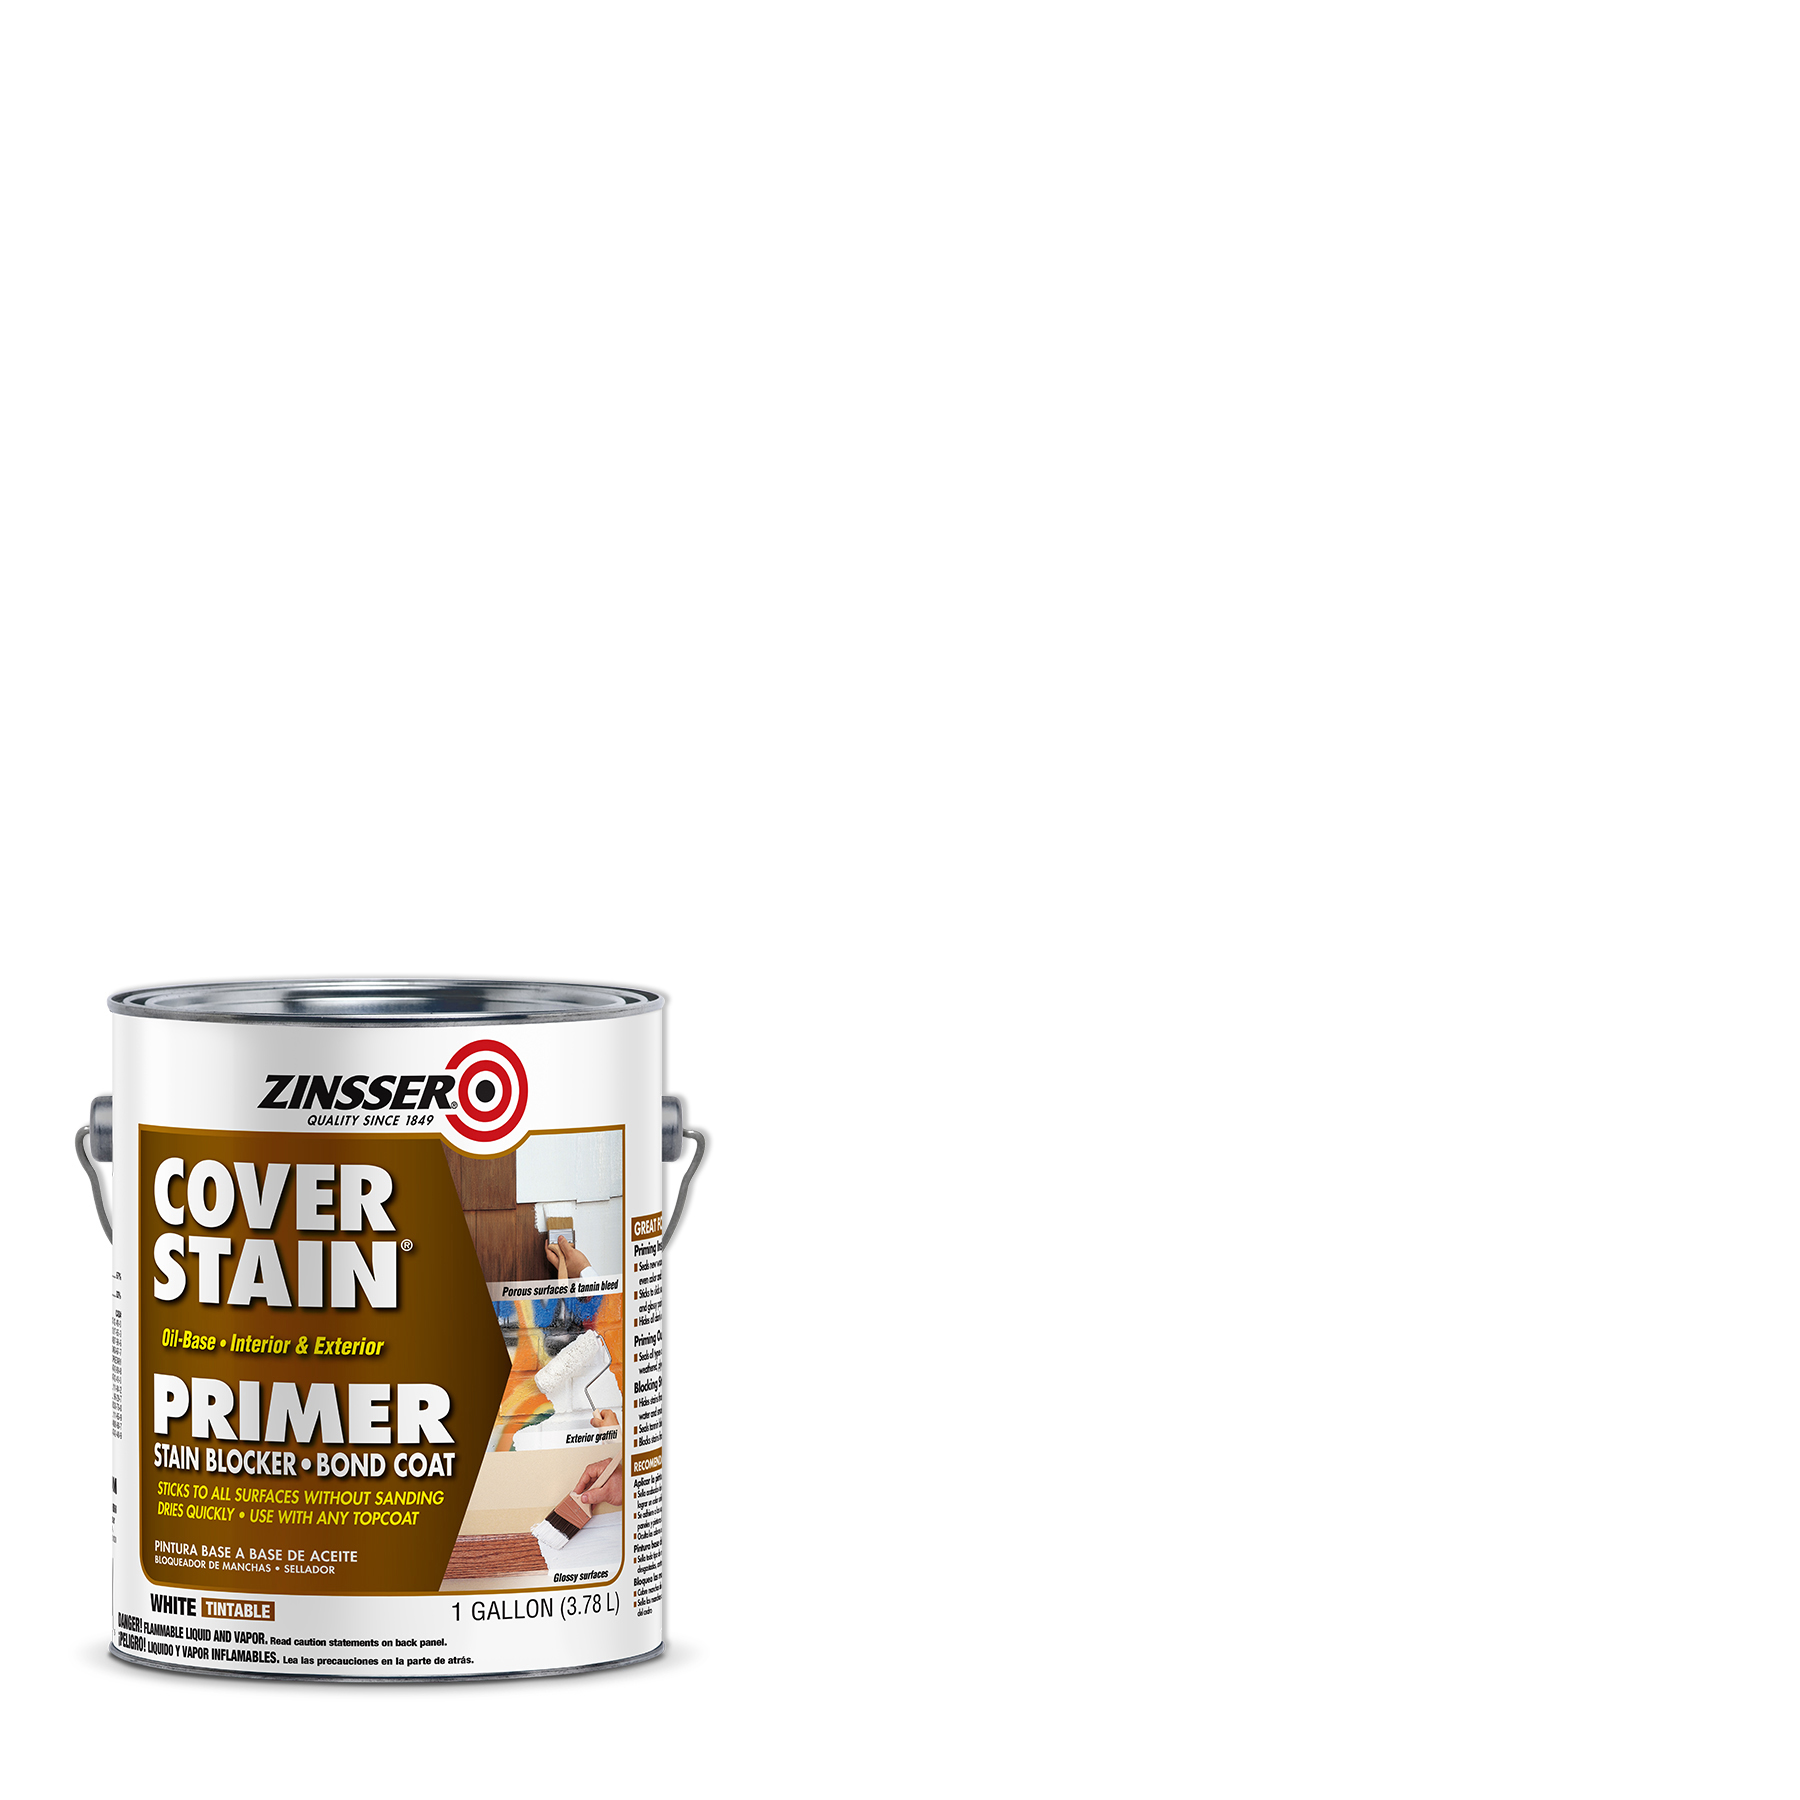 White, Zinsser Cover Stain Flat Oil-Based Interior and Exterior Primer and Sealer-3501, Gallon - image 1 of 11